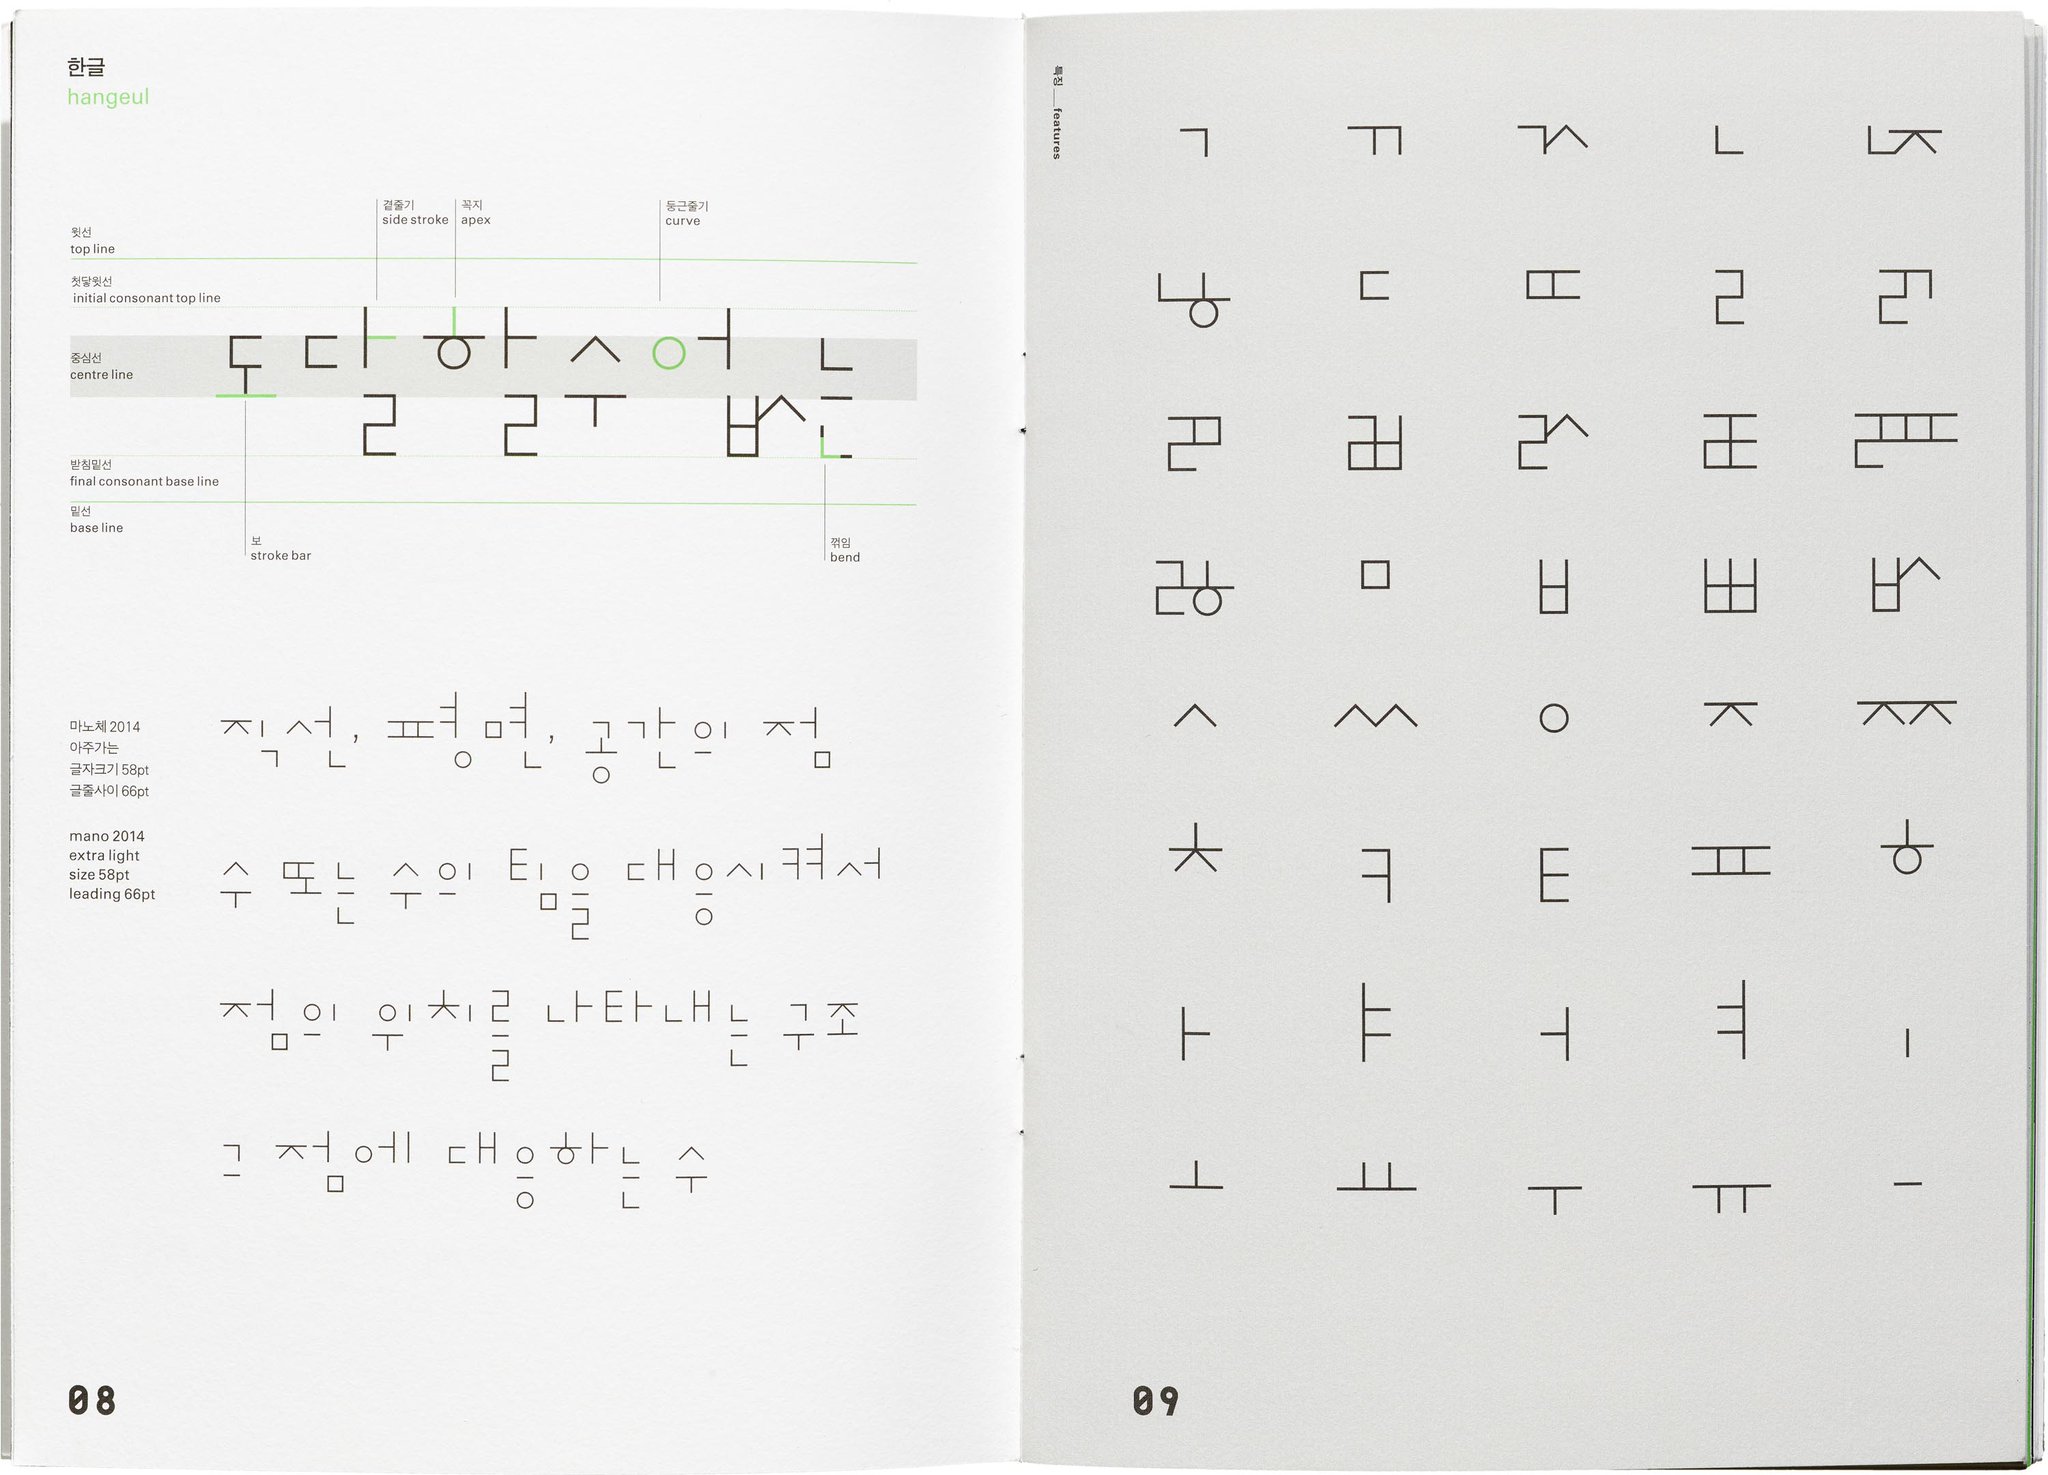 Chamekan From The Collection Ahn Sang Soo And Ag Typography Institute T Co Dpnqmz4gfx Dating Back To 1985 Specimens Of Ahn S Digital Type Represent The Origins Of Exploration And Play Found In Hangul Design Today いいね